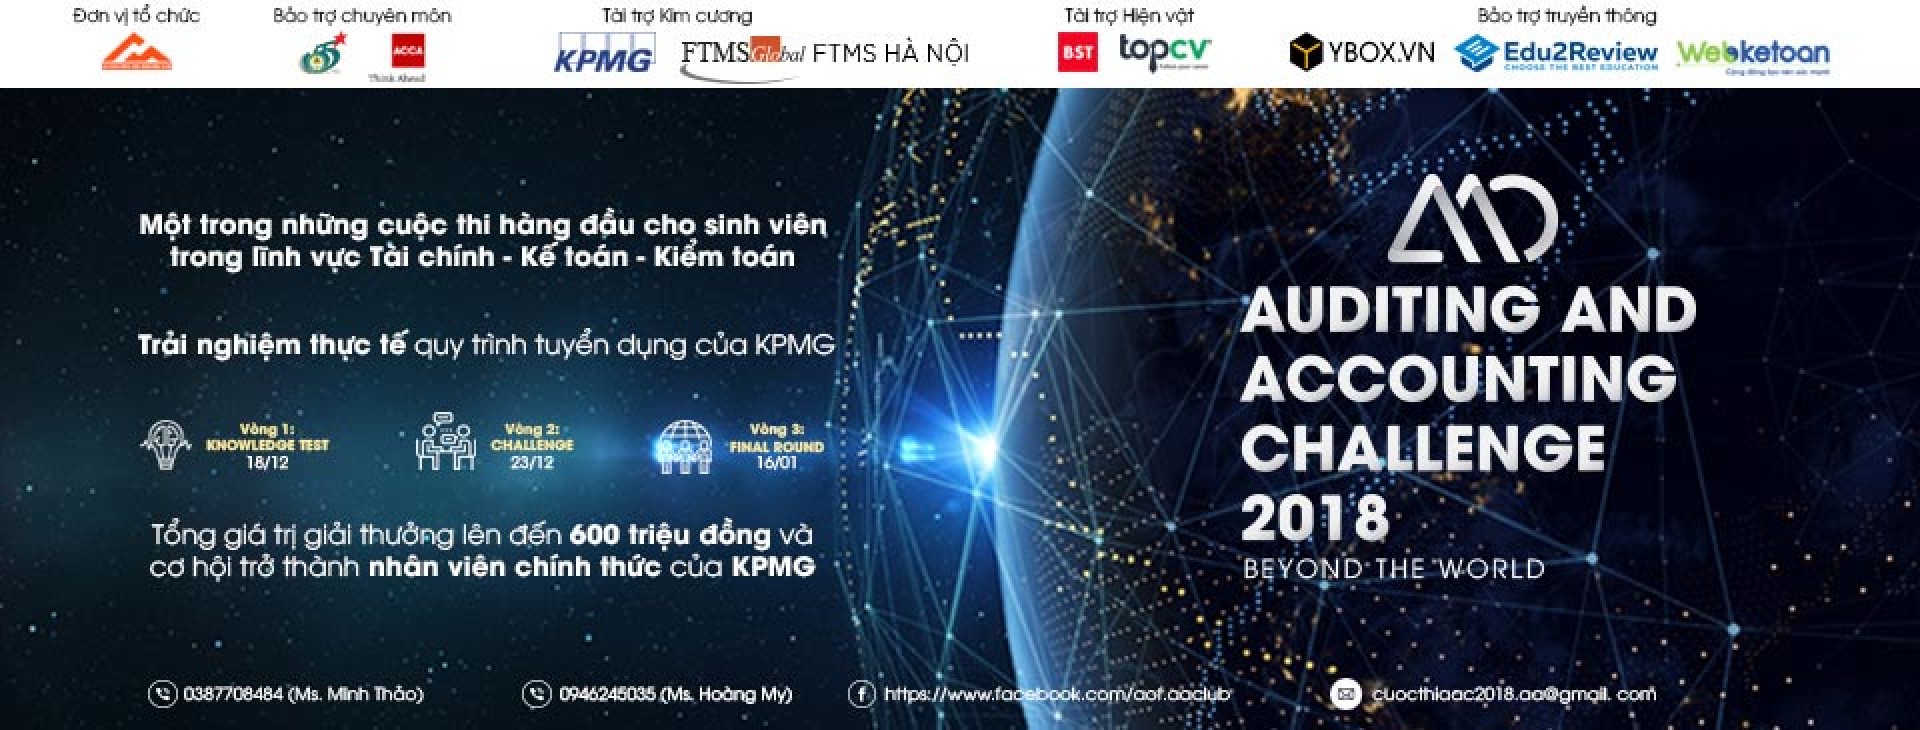 AUDITING AND ACCOUNTING CHALLENGE 2018 - “BEYOND THE WORLD”